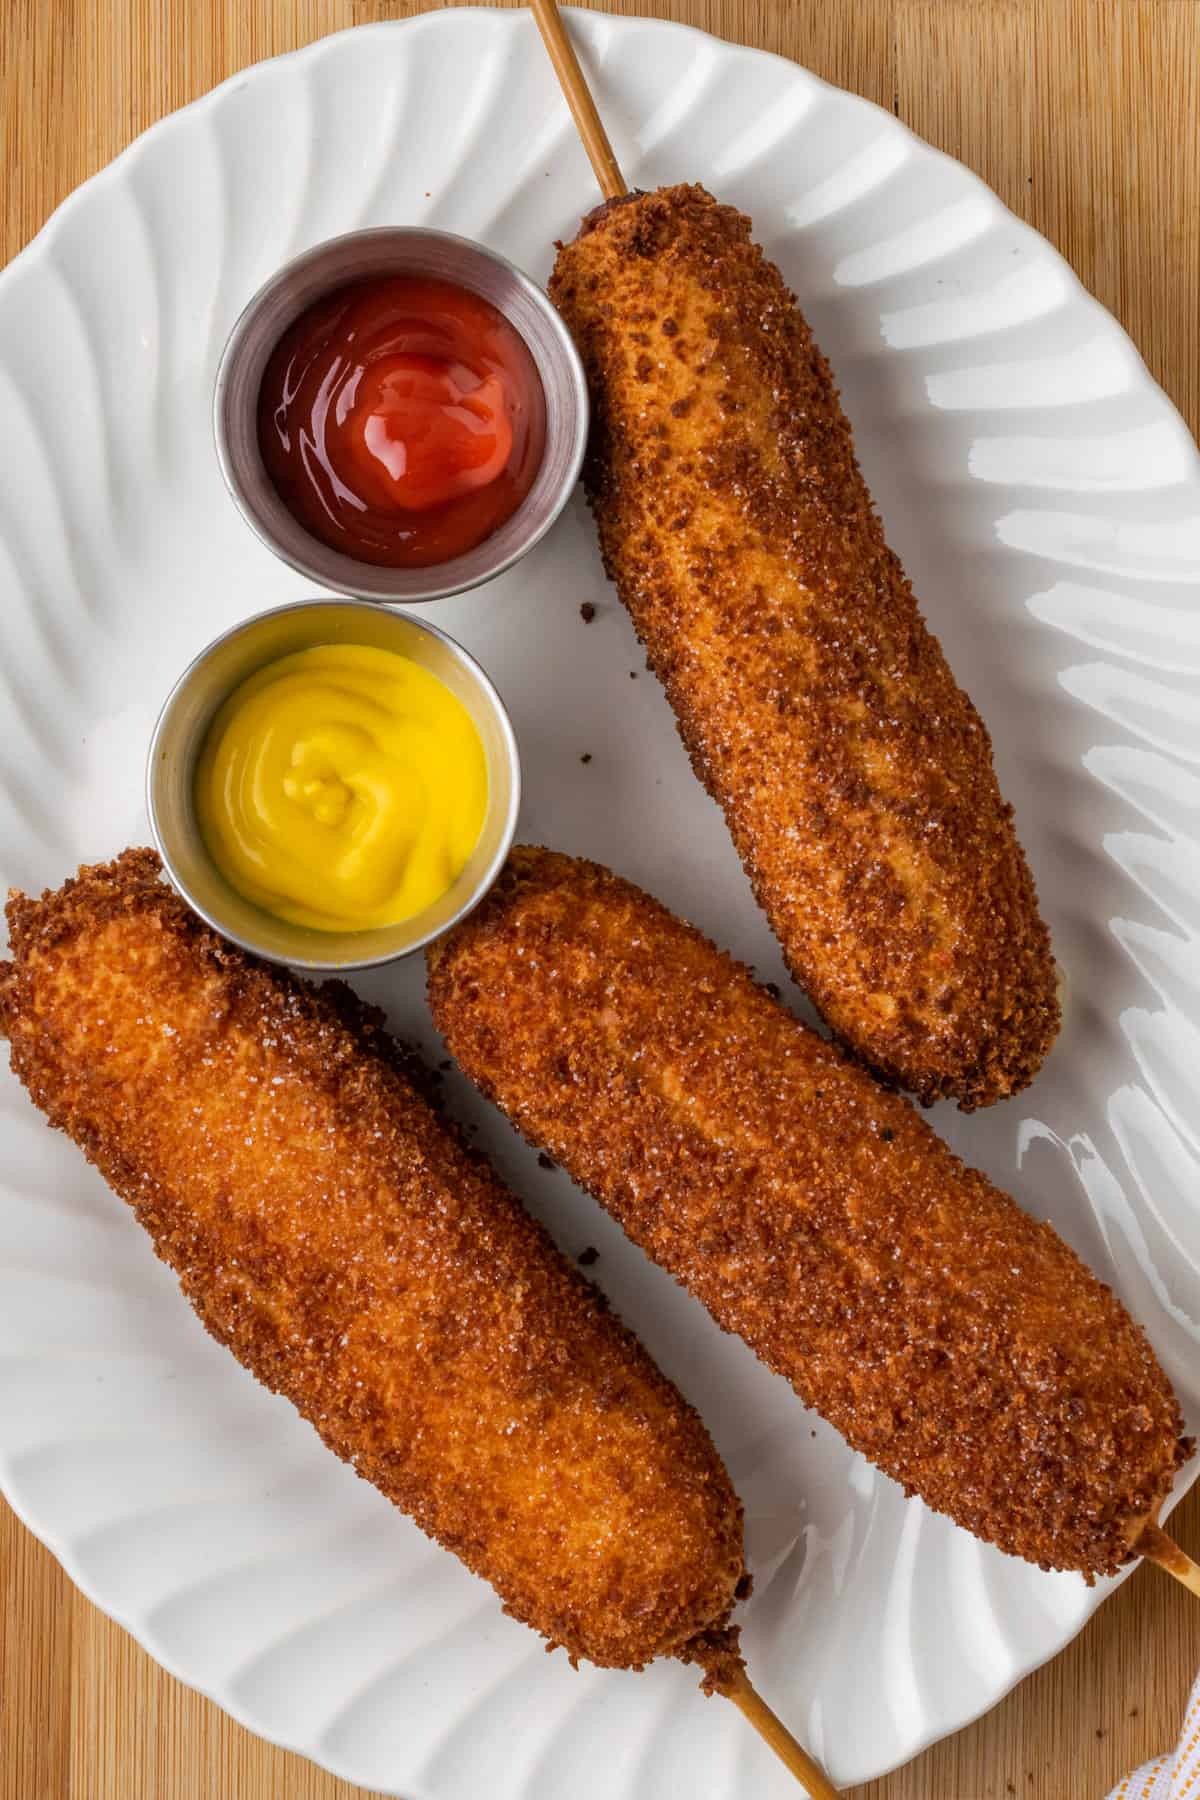 Gluten-free korean corn dogs are shown on a plate with ketchup and mustard.